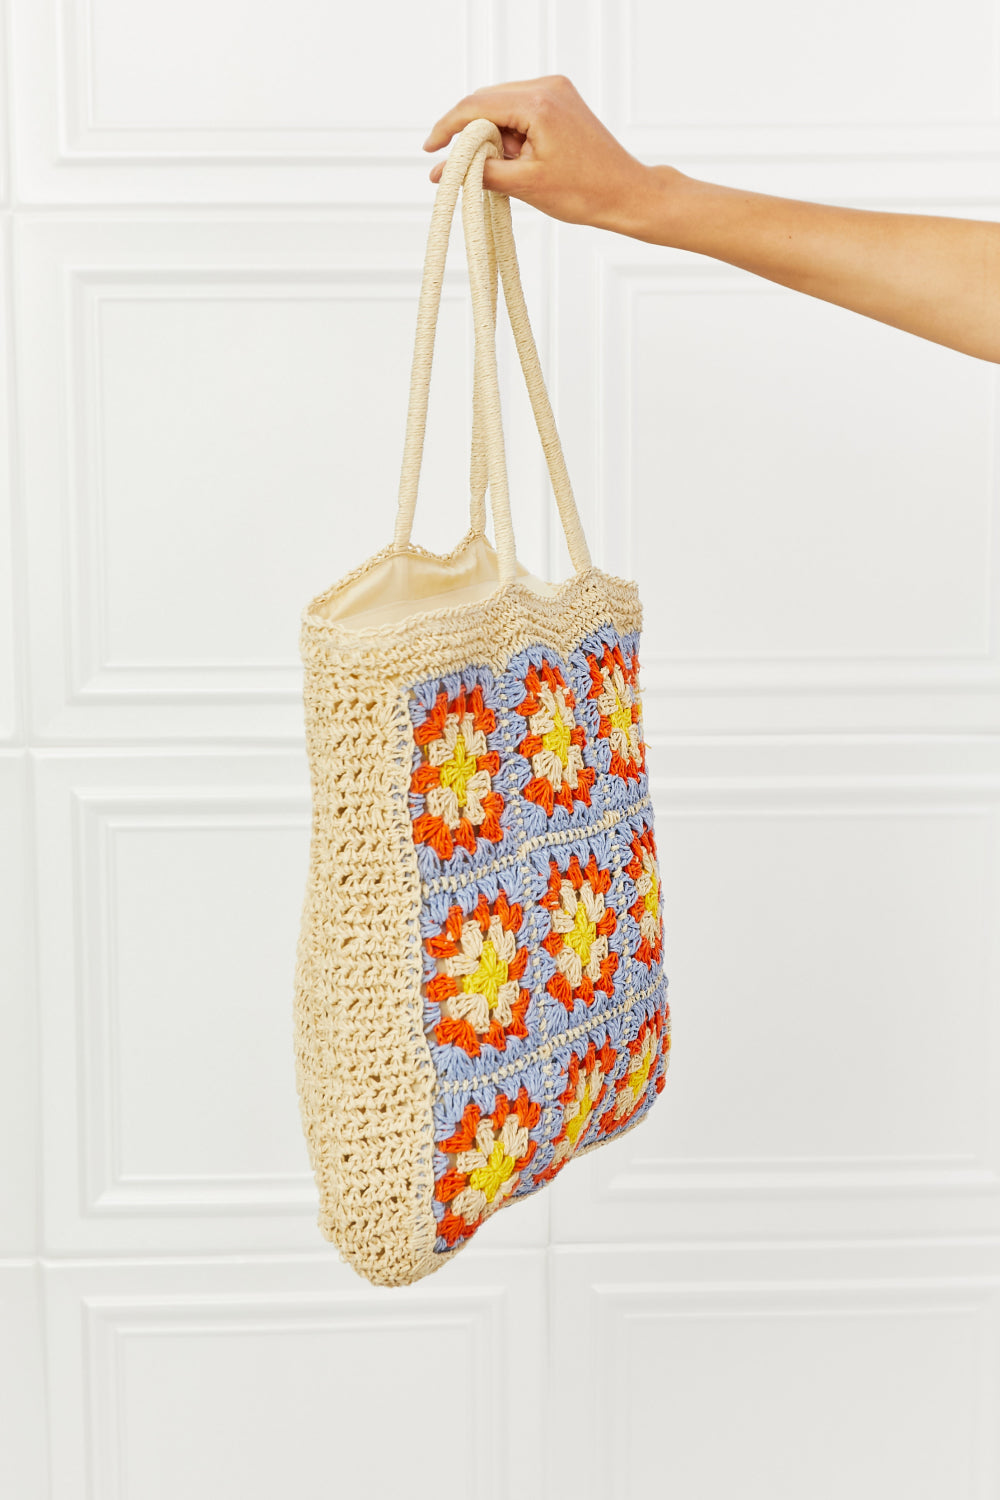 Fame Off The Coast Straw Tote Bag - Pacis and Pearls